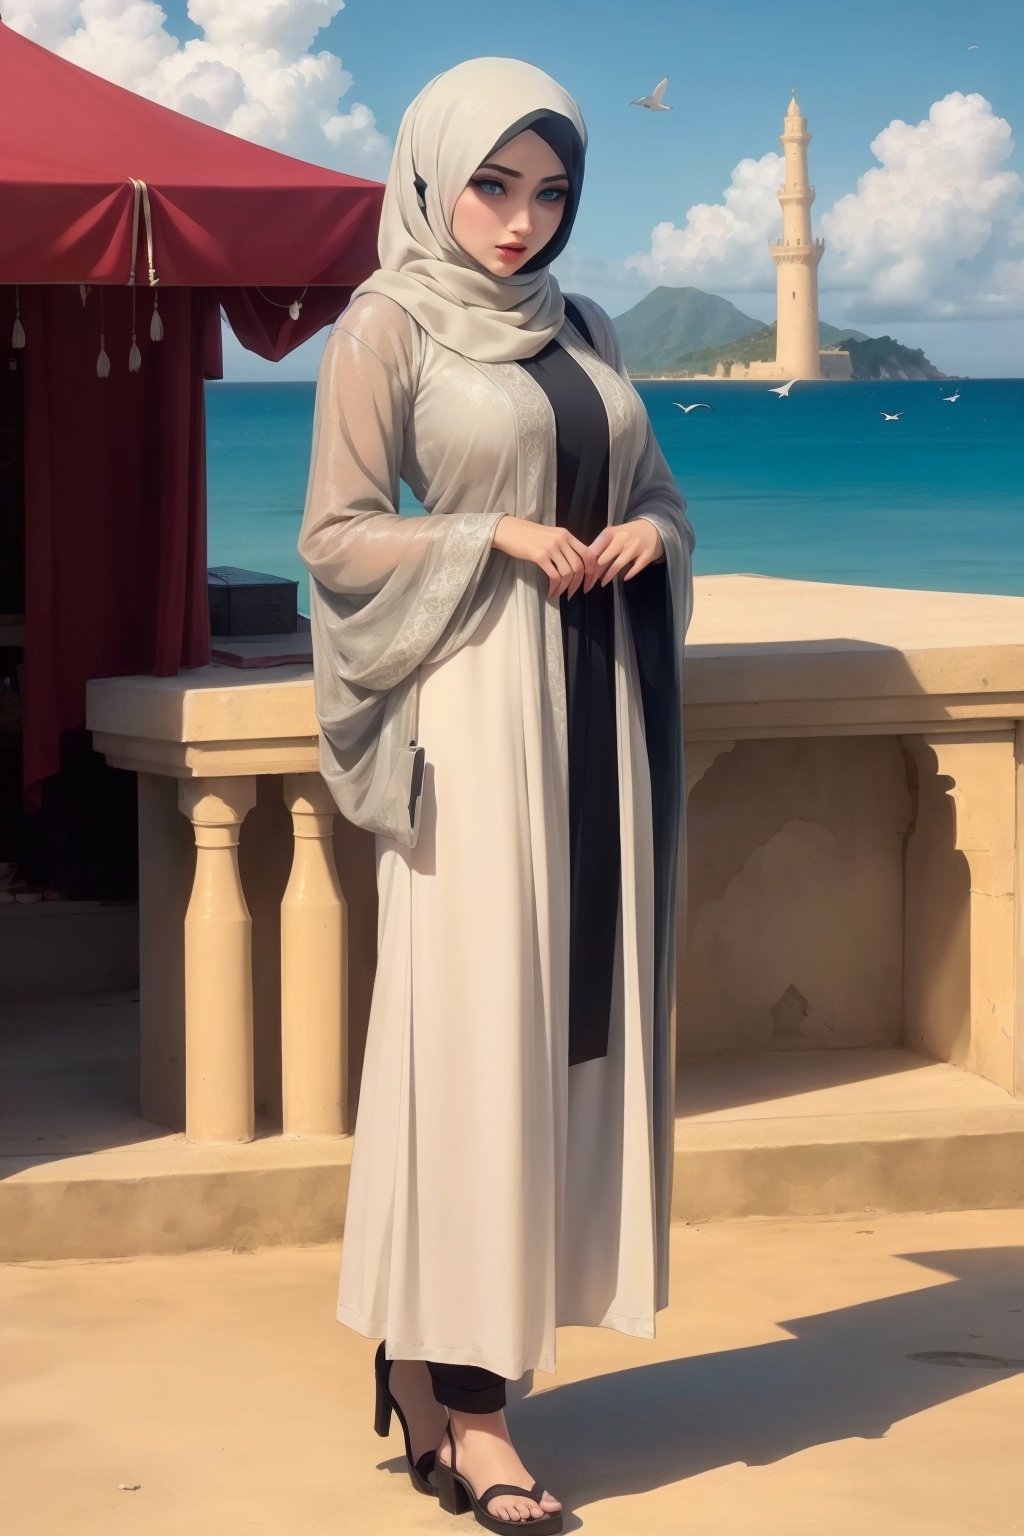 Woman(slim body, young, blue eyes, arab, morrocan, eyelashes, hijab, Wearing a white headscarf and veill,Gorgeous abaya,arabian pants Arabian, feminine, beautiful), (full body), Staring at you while reporting news at news stage, background(outdoor, day, sun, ocean, mosques, birds), (Shot from distance),(masterpiece, highres, high quality:1.2), ambient occlusion, low saturation, High detailed, Detailedface, Dreamscape,perfect